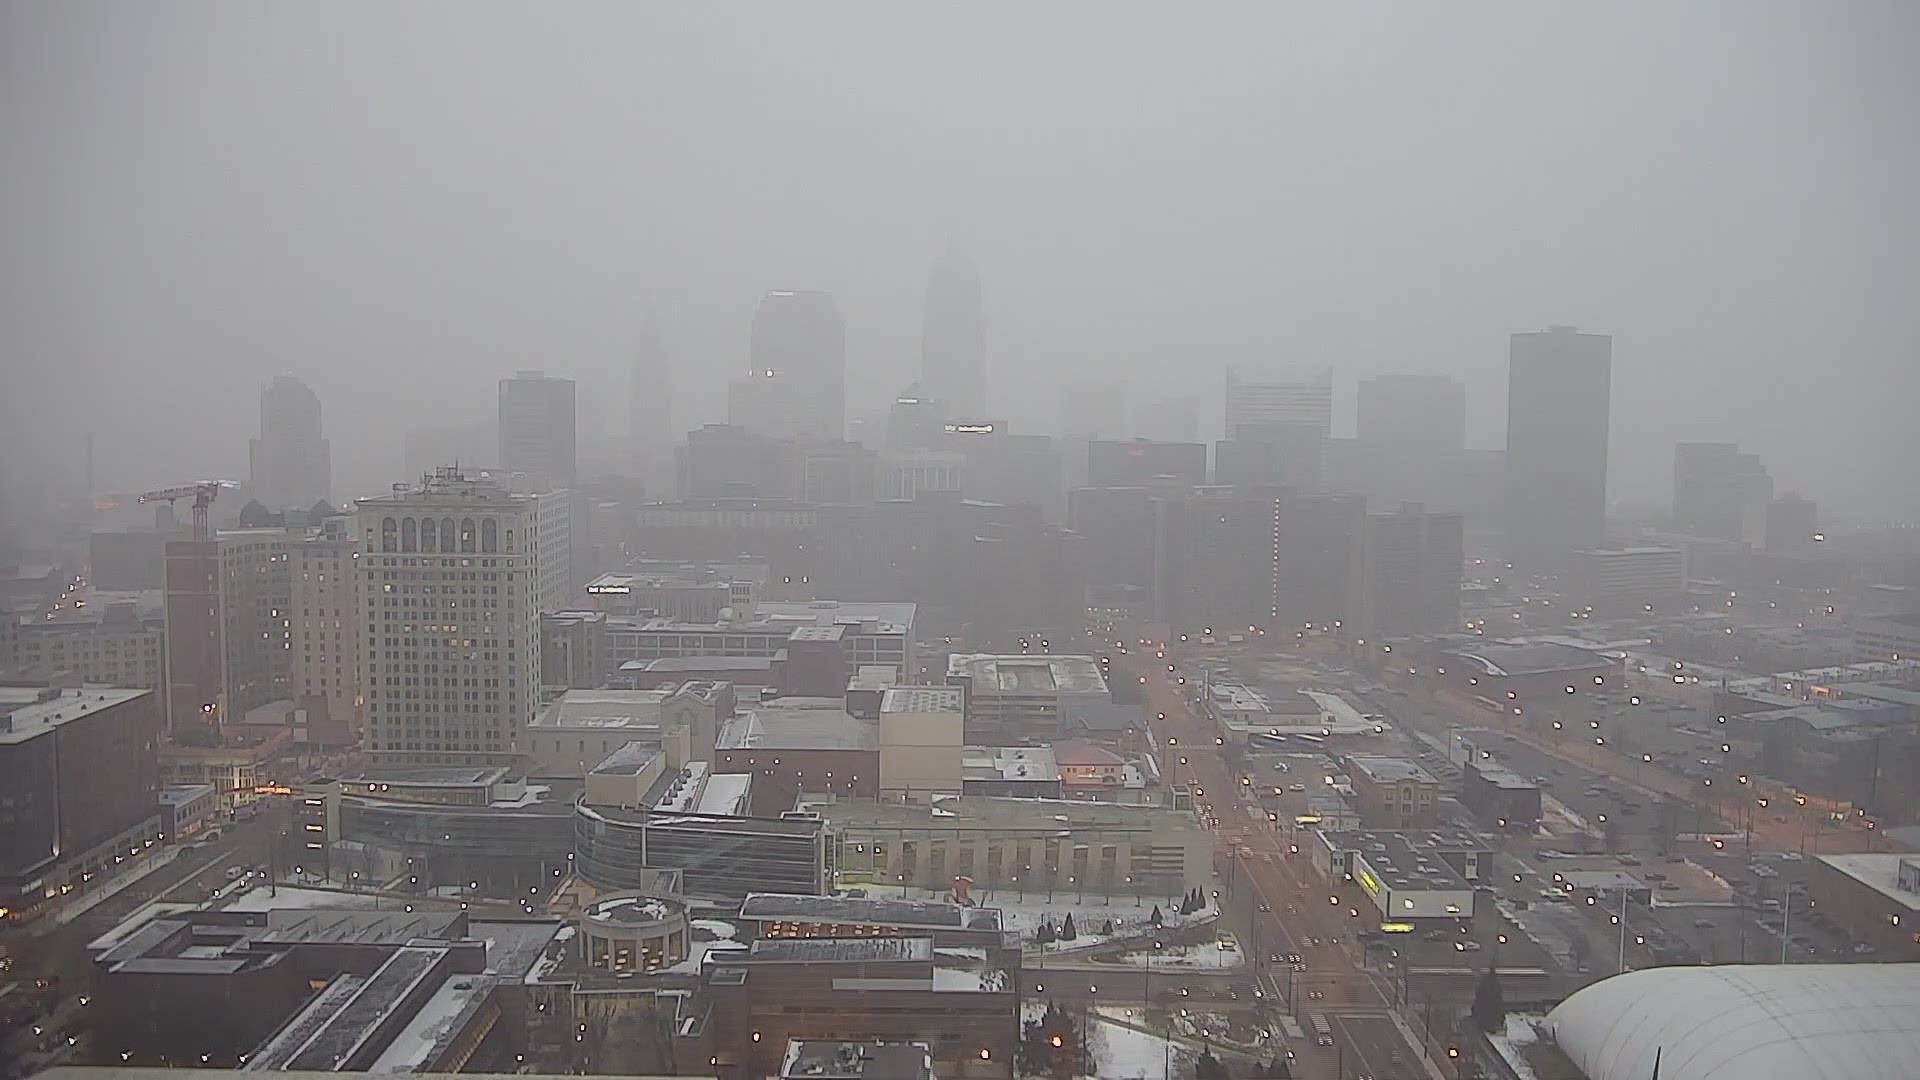 WATCH | Check out our all-day Cleveland weather time-lapse from the Channel 3 CSU Skycam for Wednesday. Some snow...and lots of heavy cloud cover on Wednesday (2/10/19) #3weather